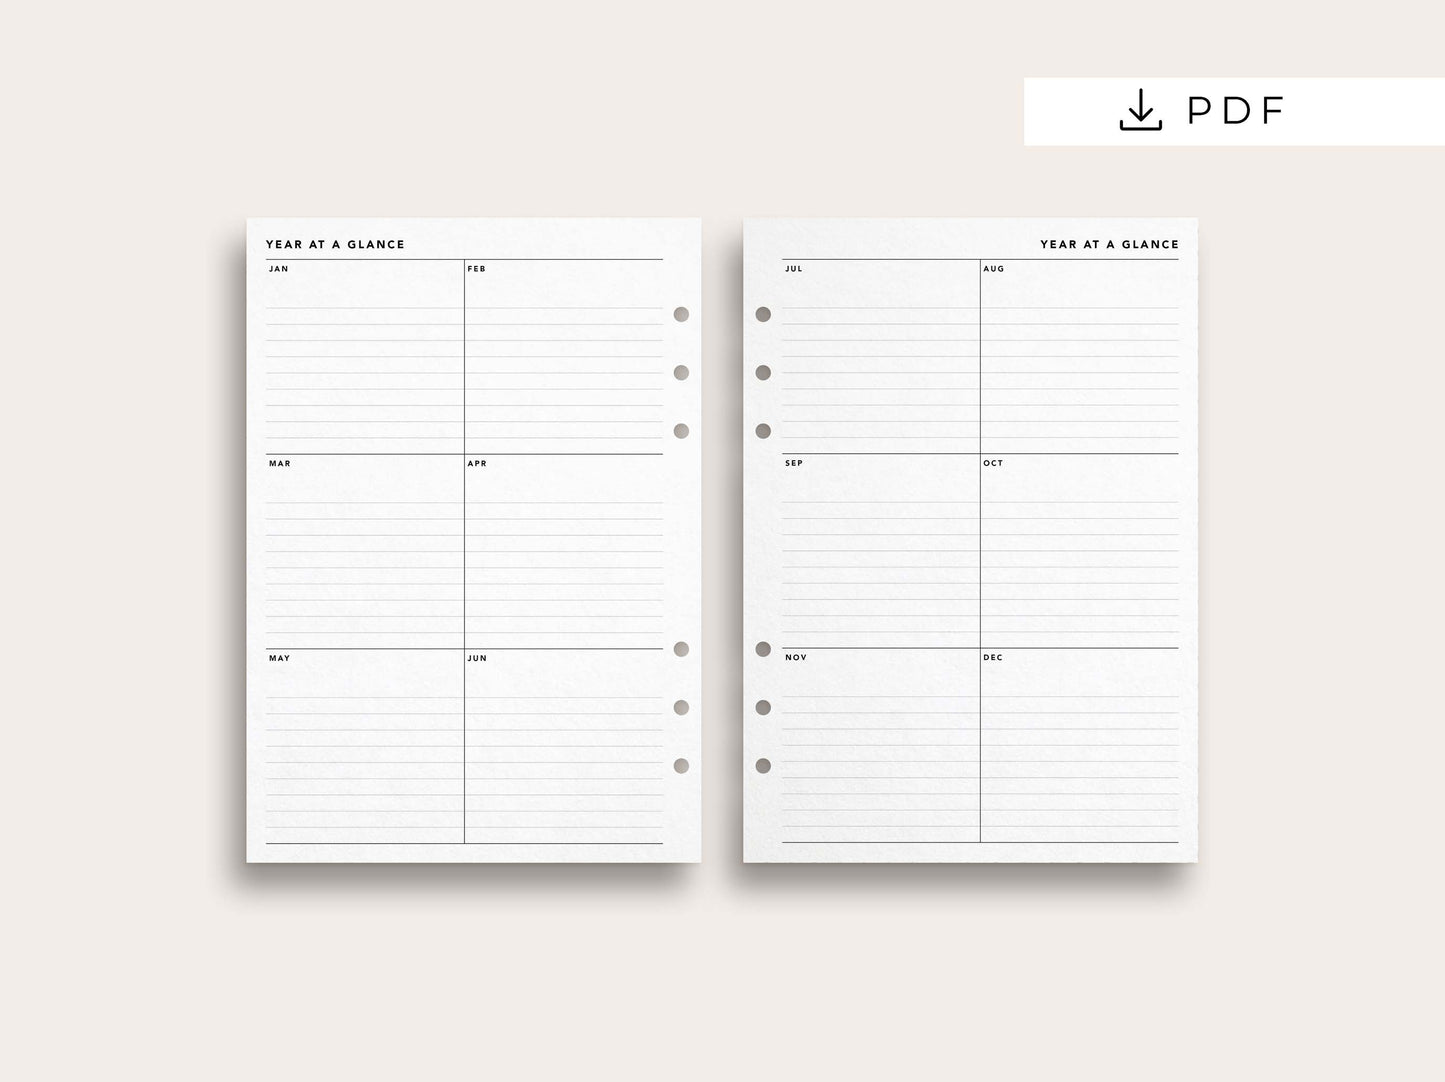 Yearly Planner No. 4 / Year at a Glance